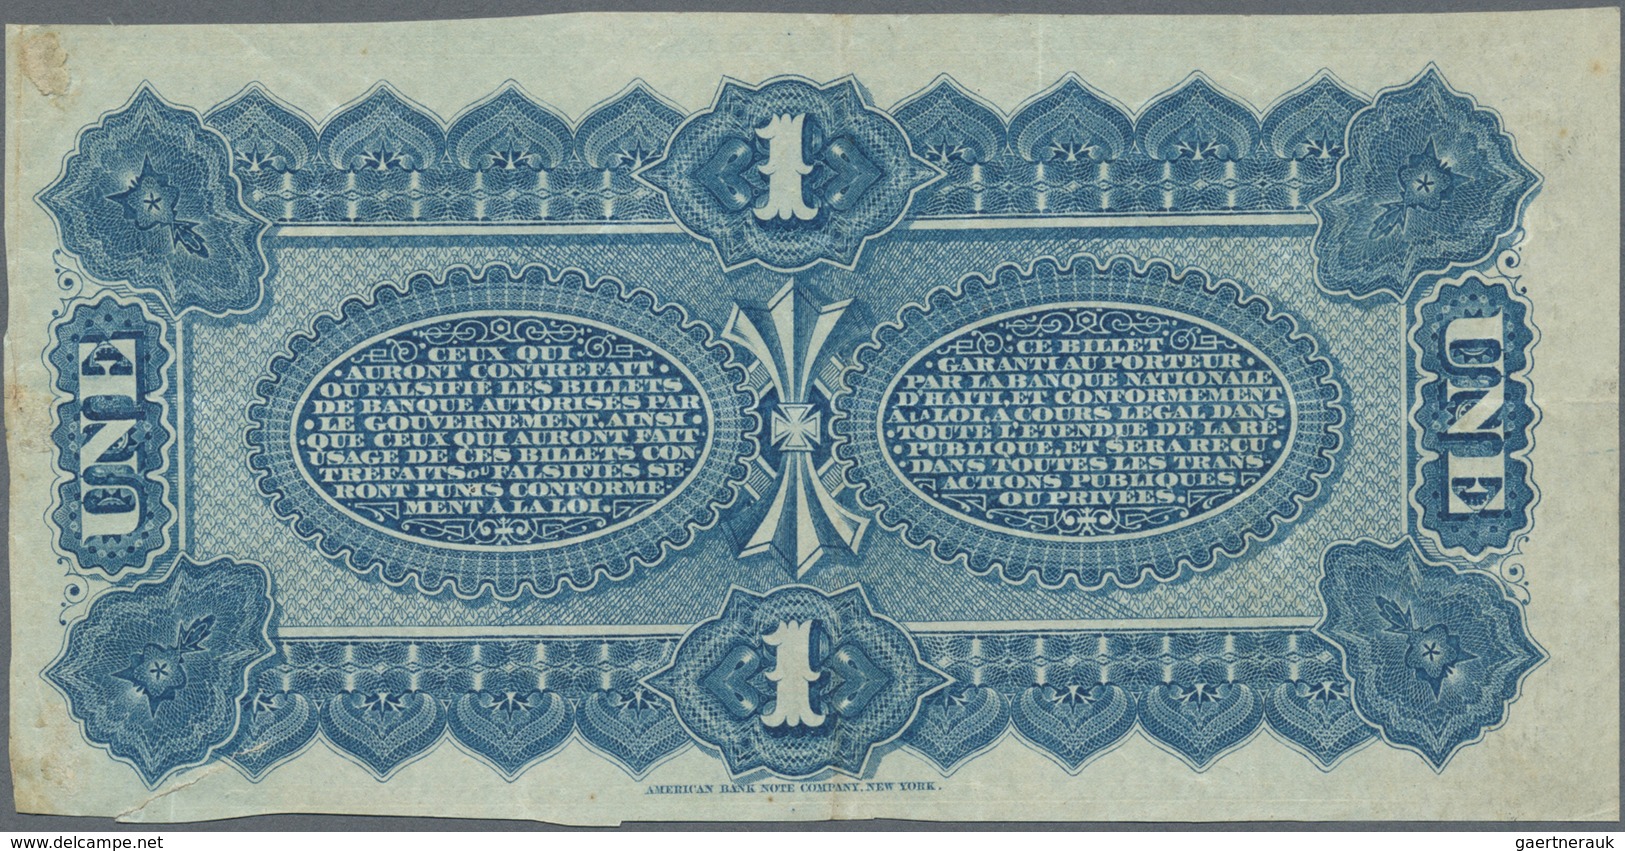 Haiti: 1 Piastre 1875 Remainder P. 70r, Used With Folds And Traces Of Mounting On Back But No Holes - Haiti